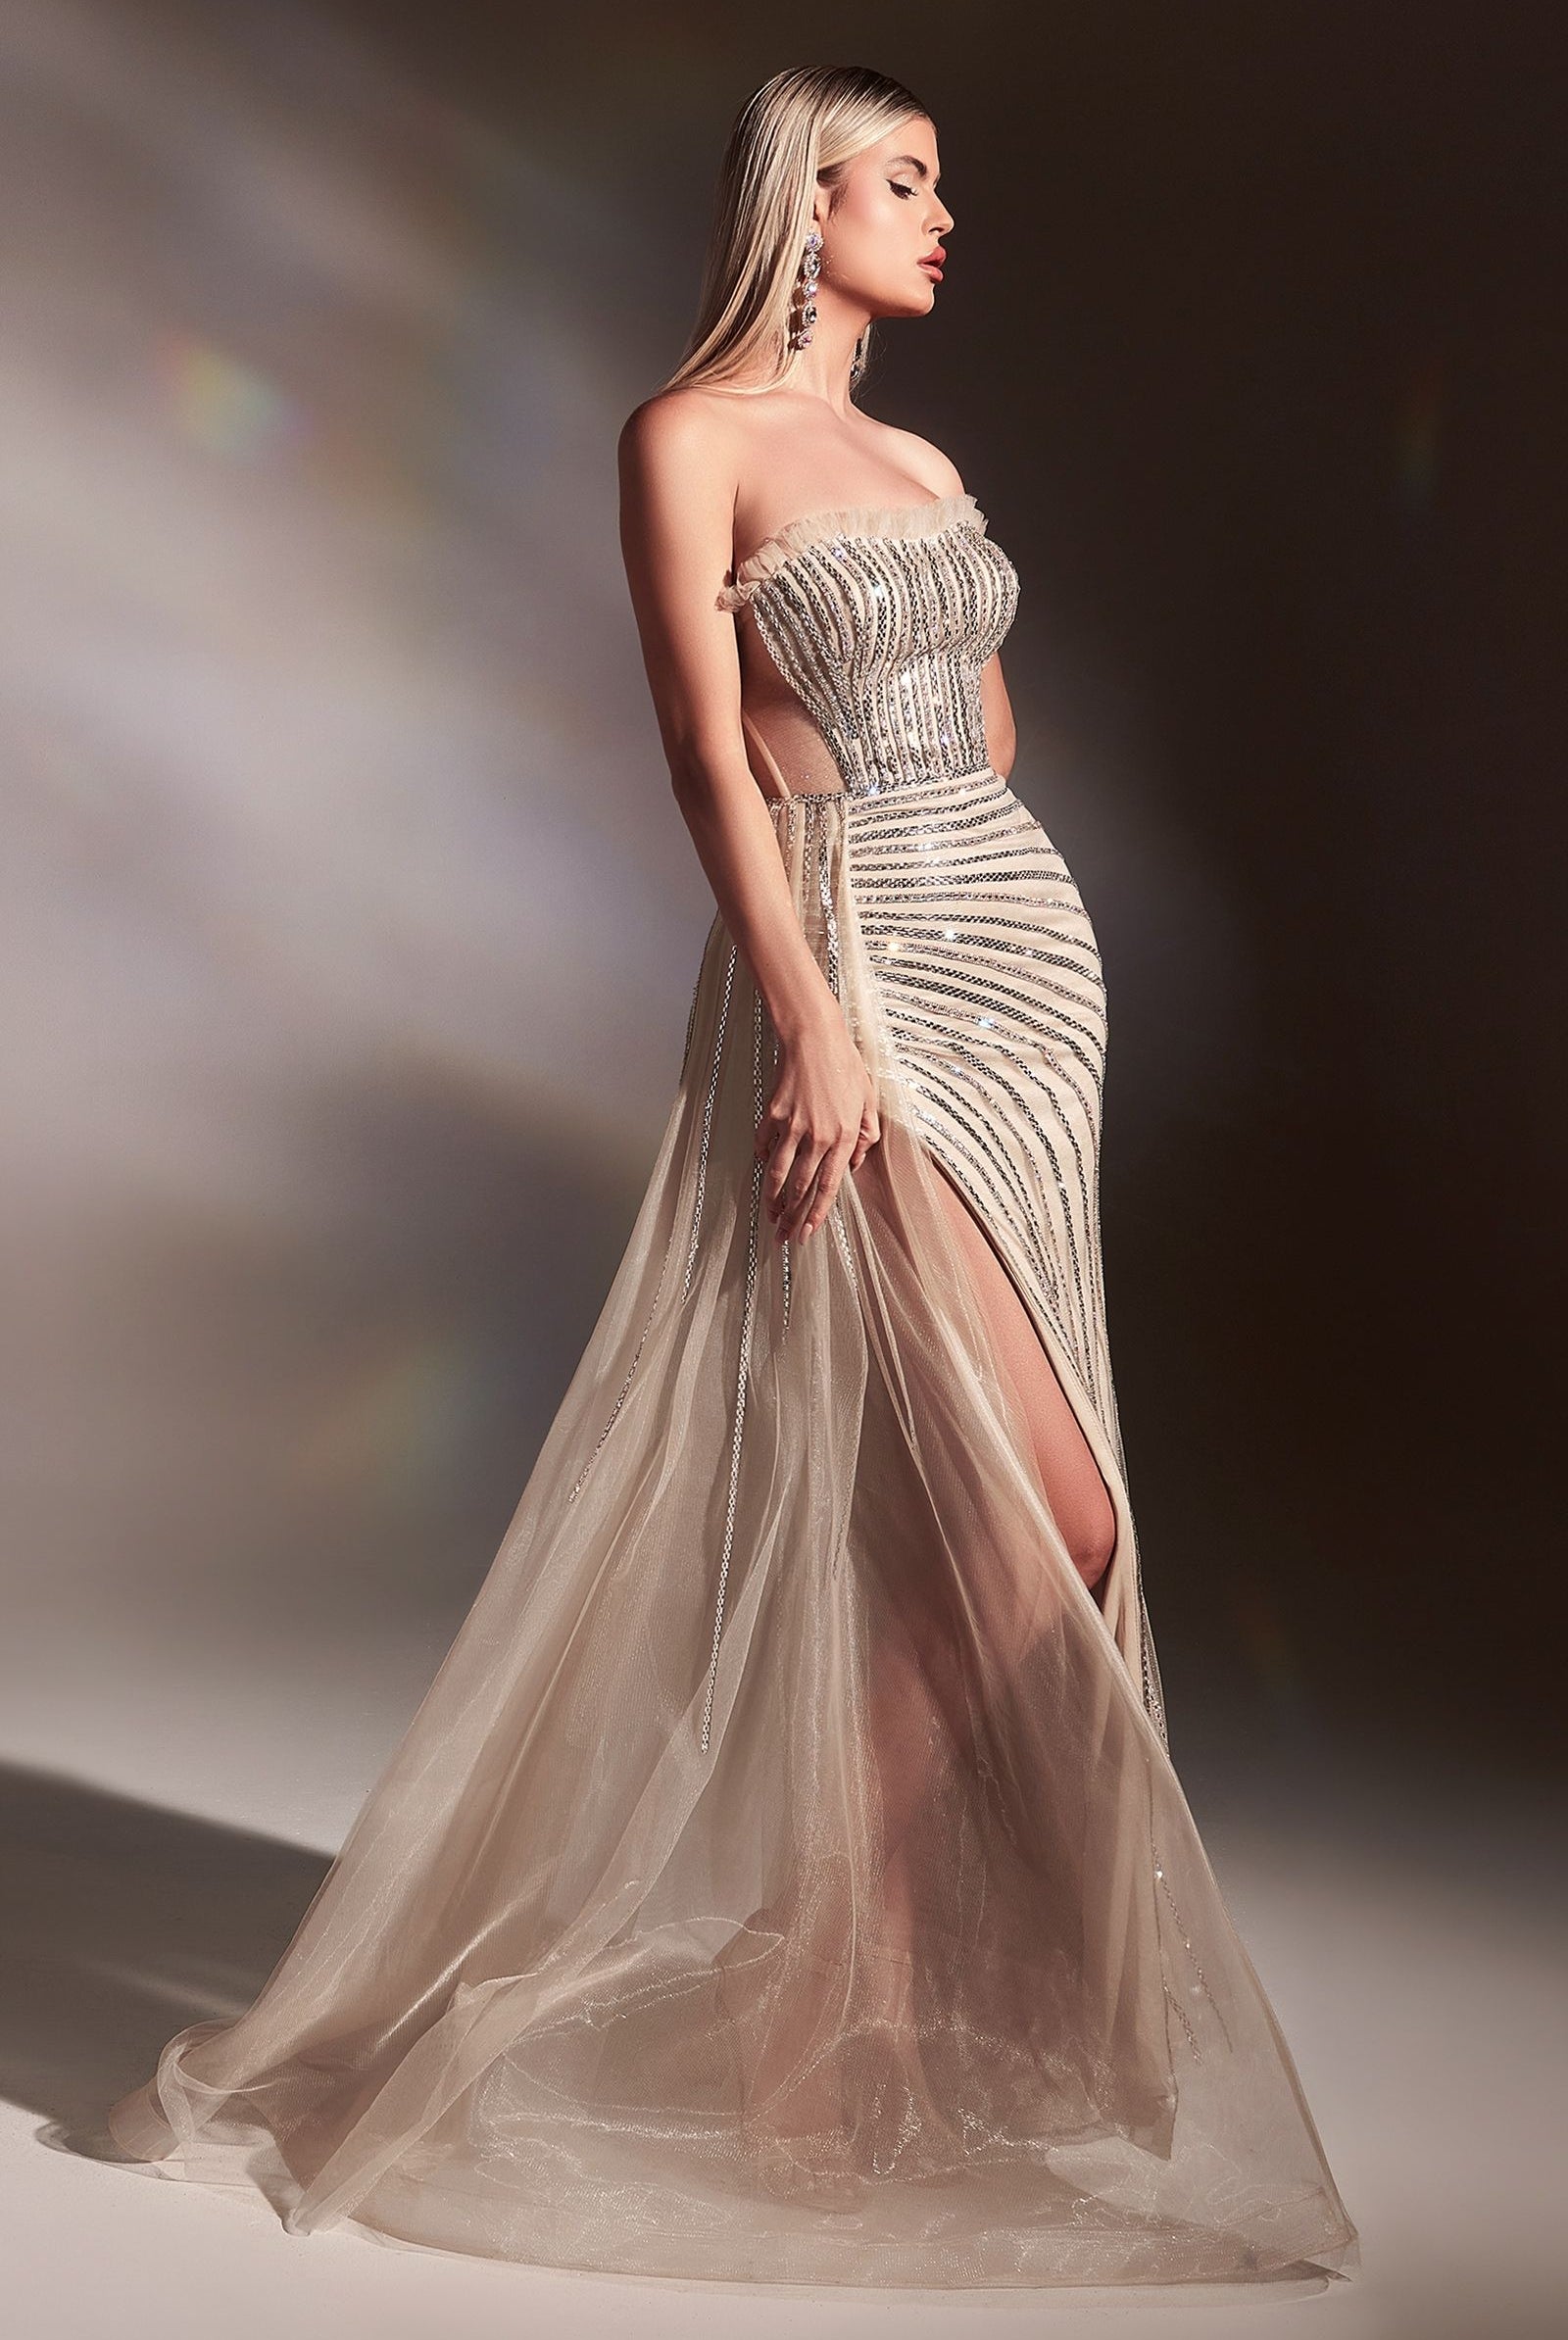 Fitted Golden Nude Gown with Sexy Right Overskirt and Rhinestone Details. Straigt Across Neck-smcdress